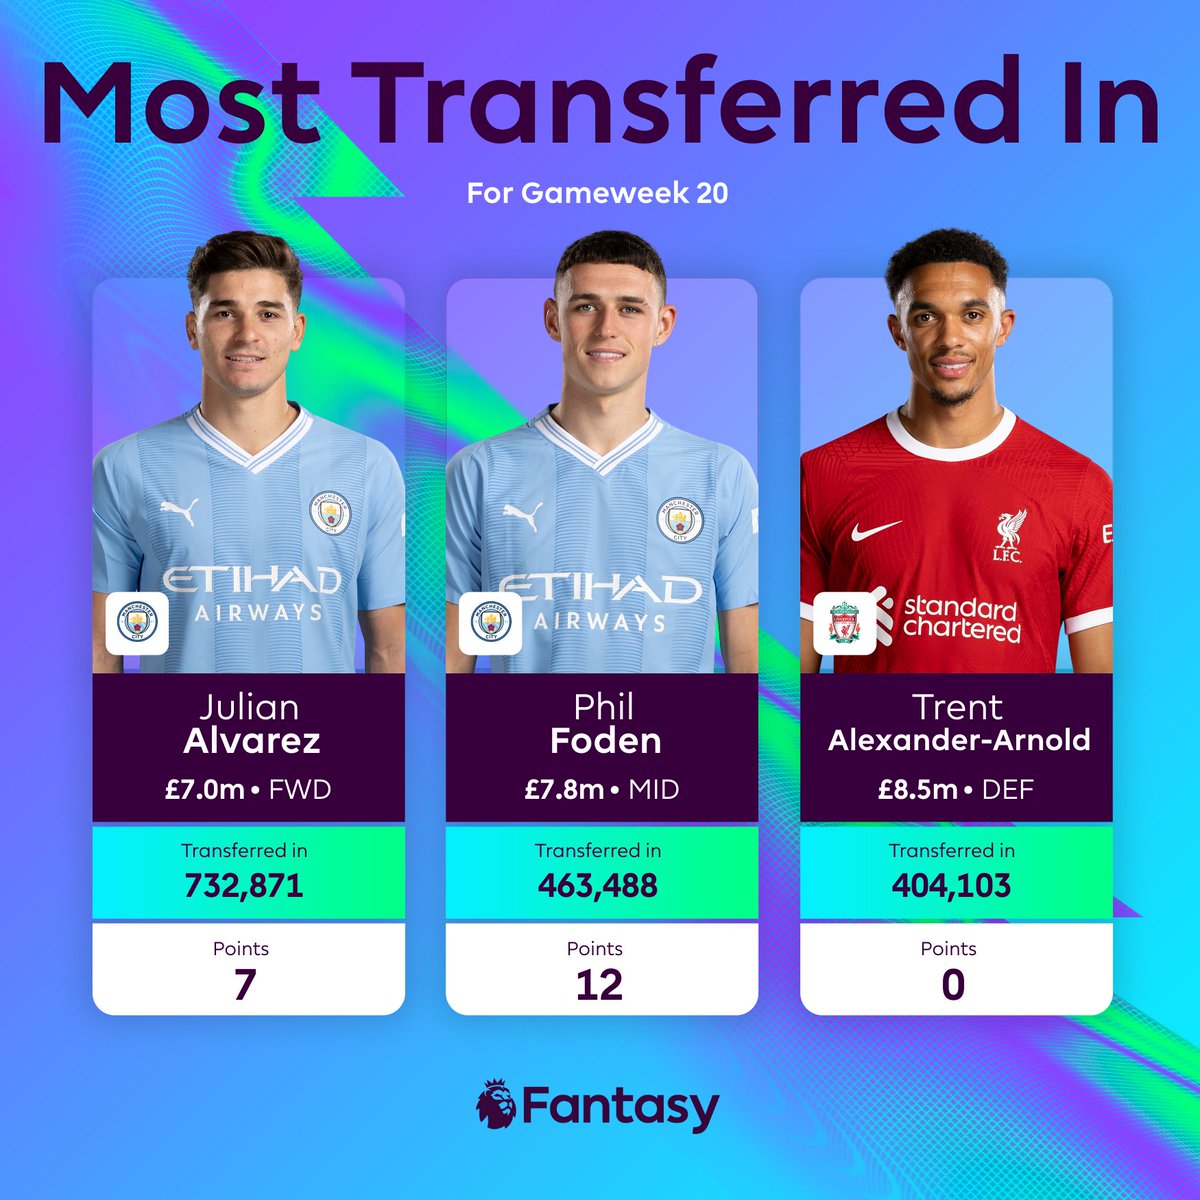 Alvarez ✅ Foden ✅ Alexander-Arnold ❌ Two of the top three most-transferred in players for Gameweek 20 provided returns for their new owners 👏 #FPL